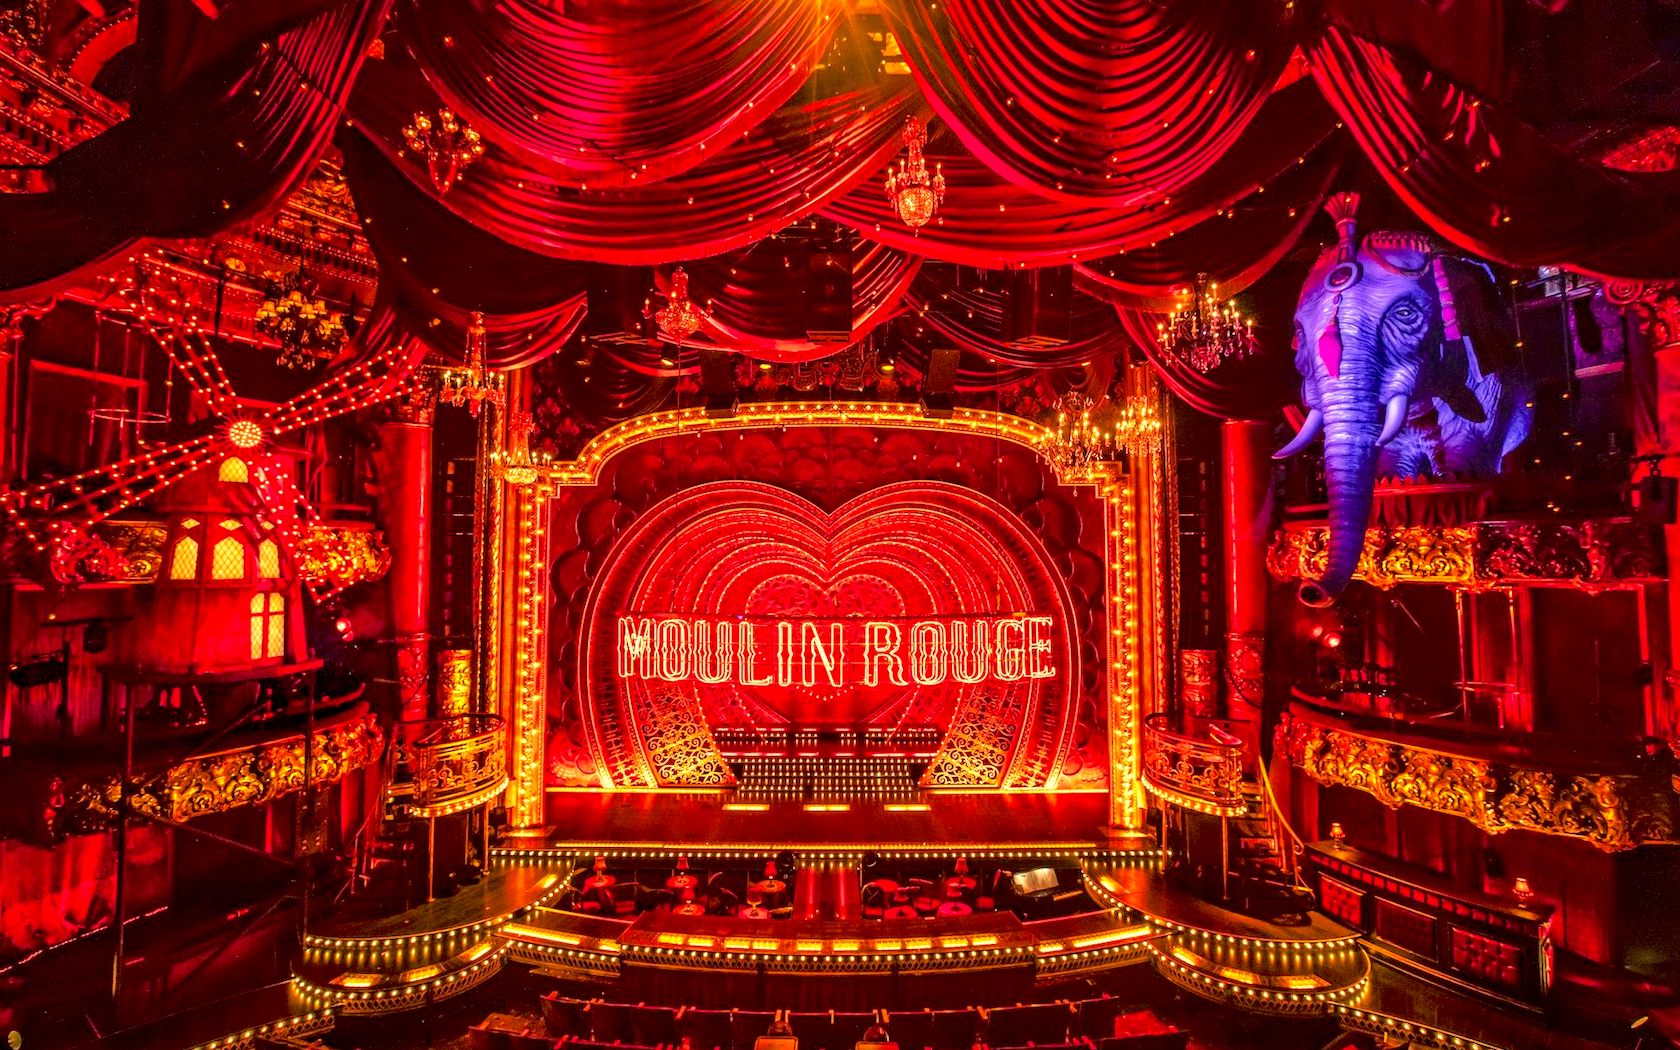 Moulin Rouge! The Musical Is Coming To Australia